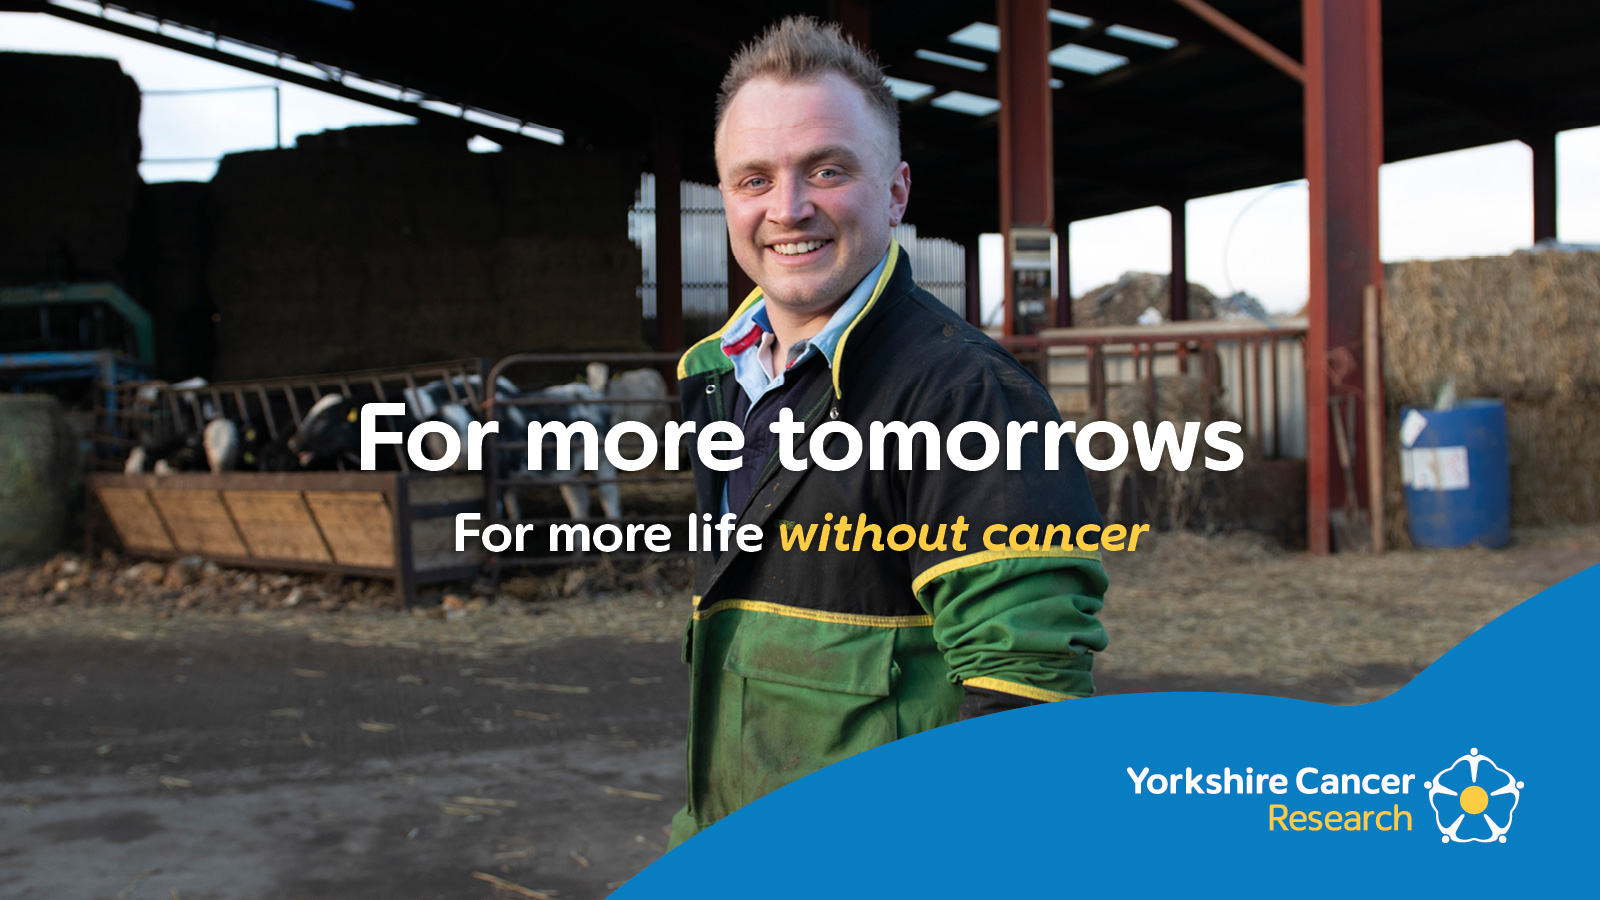 3-uk-yorkshire-cancer-research-documentary-reportage-photography-hannah-maule-ffinch-morelife